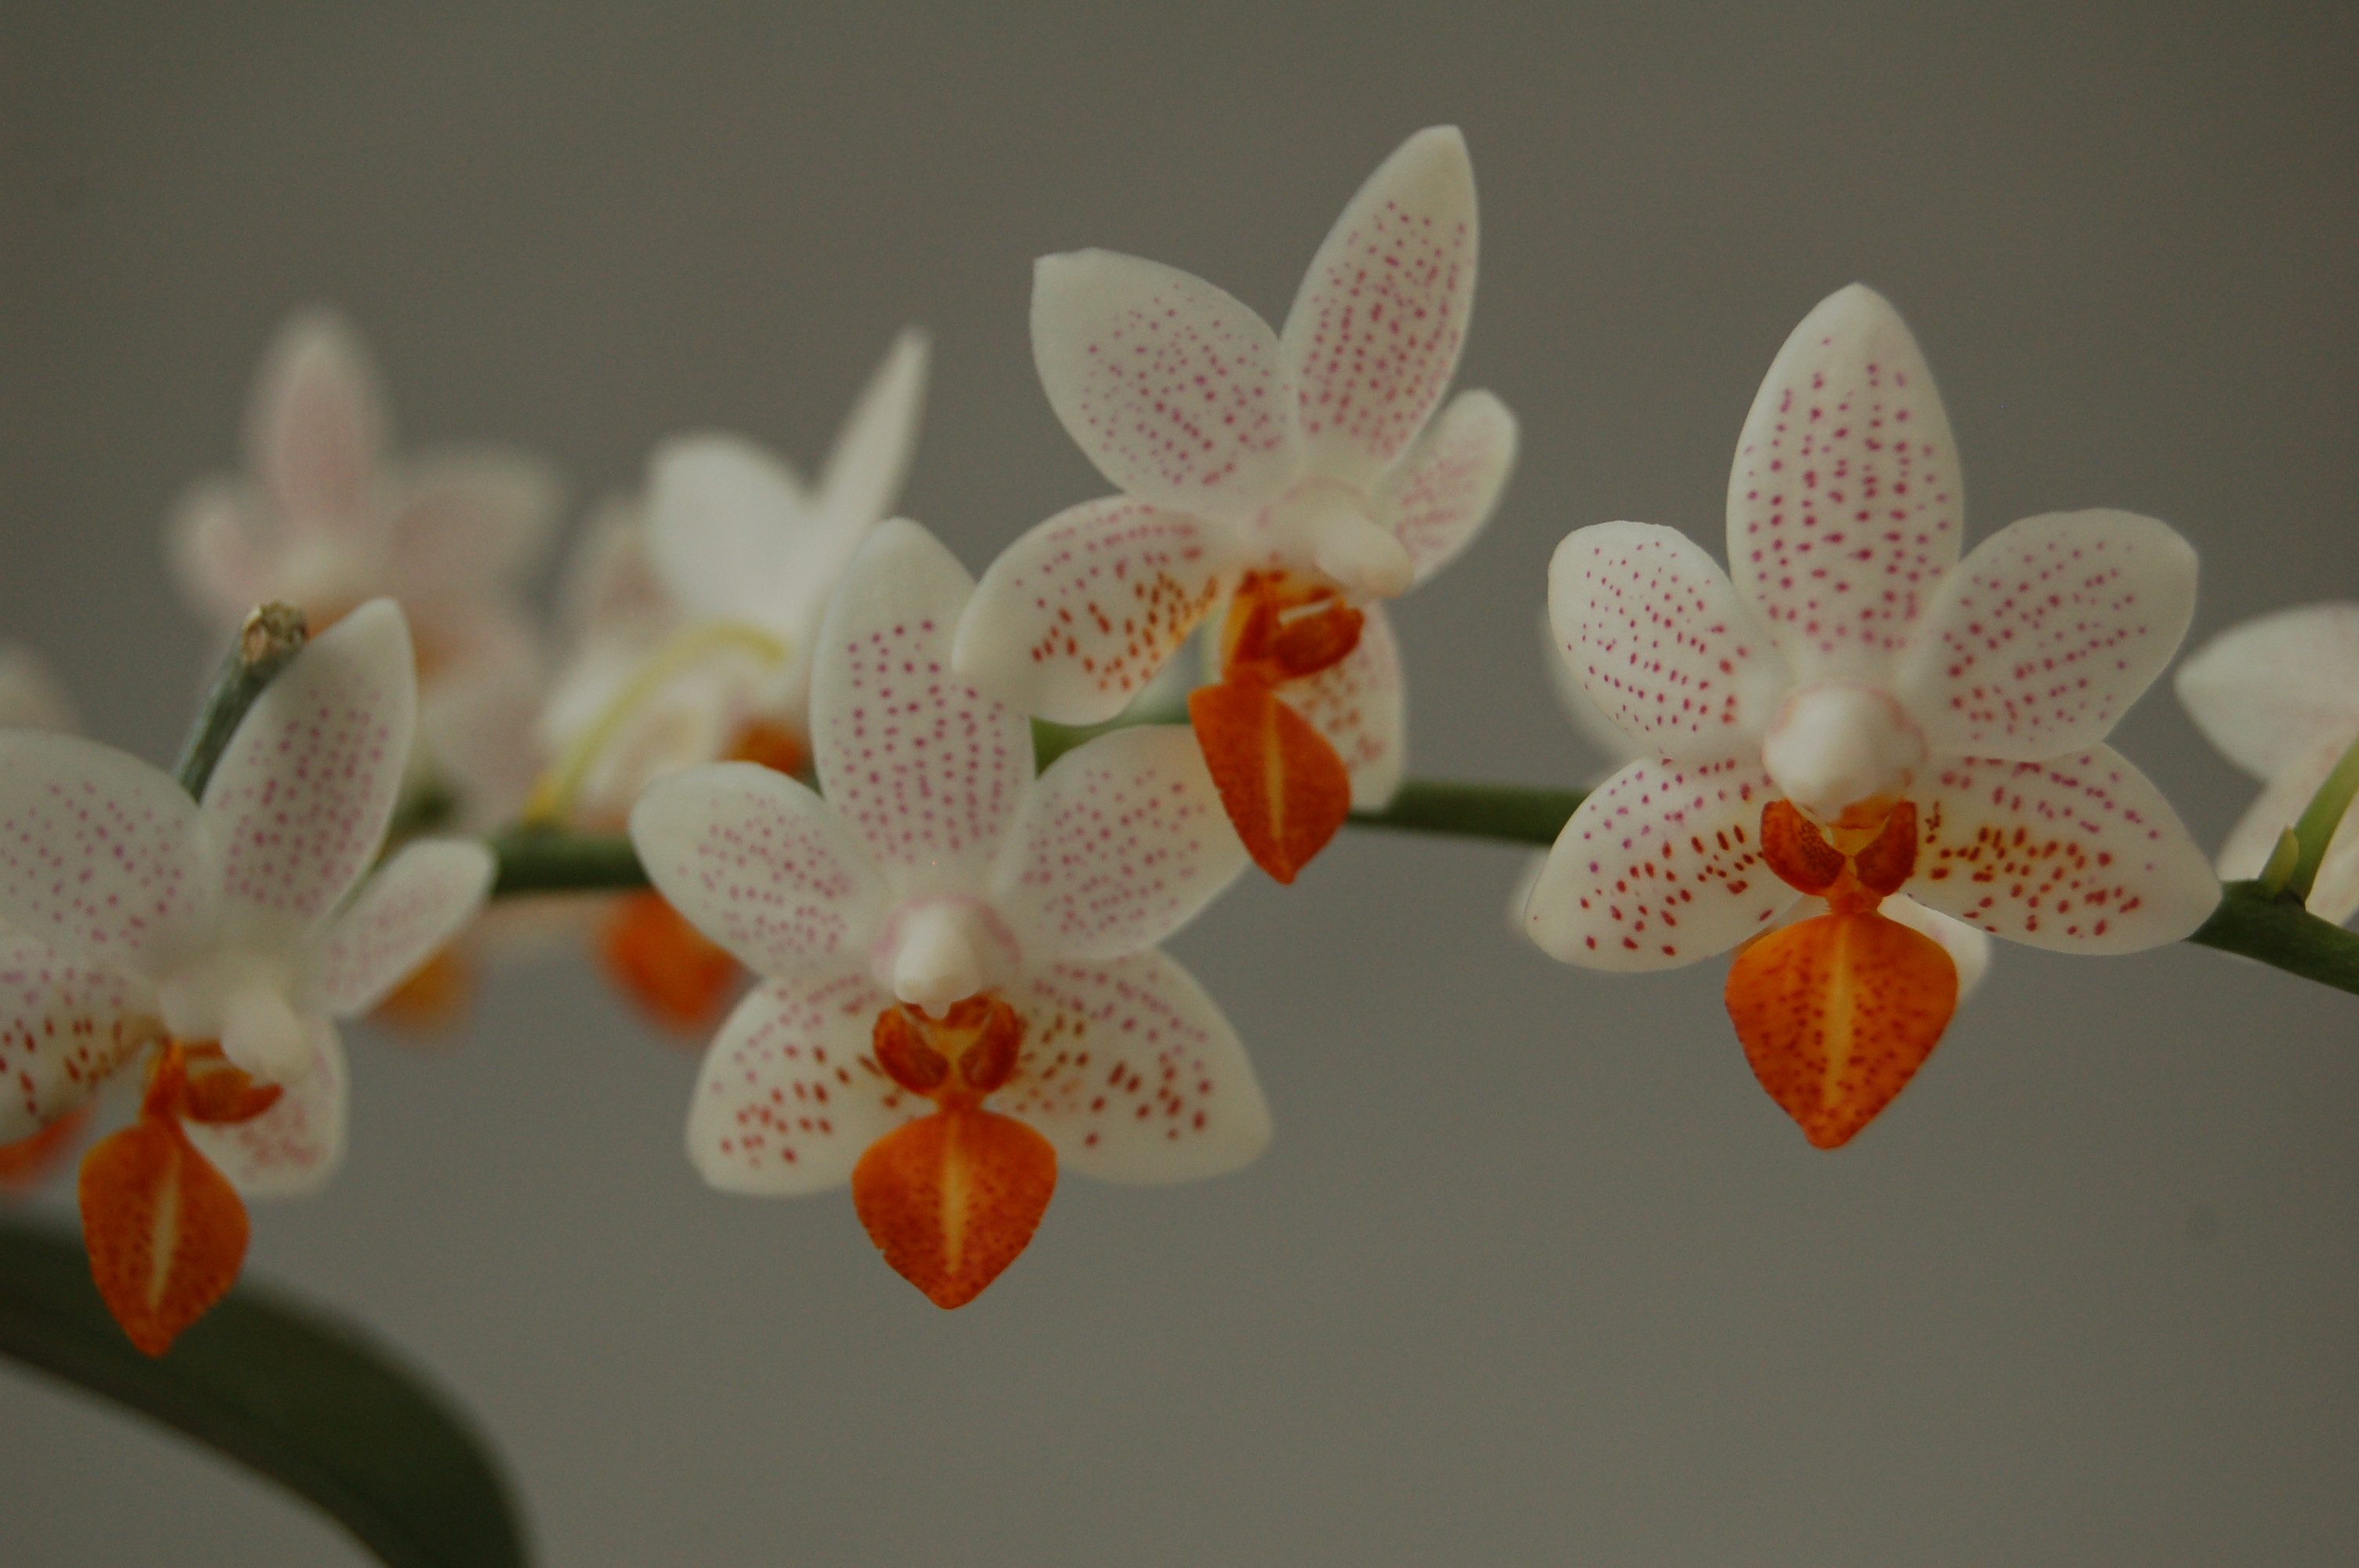 Phalaenopsis Minimark | Orchideen-Wichmann.de - Highest horticultural  quality and experience since 1897